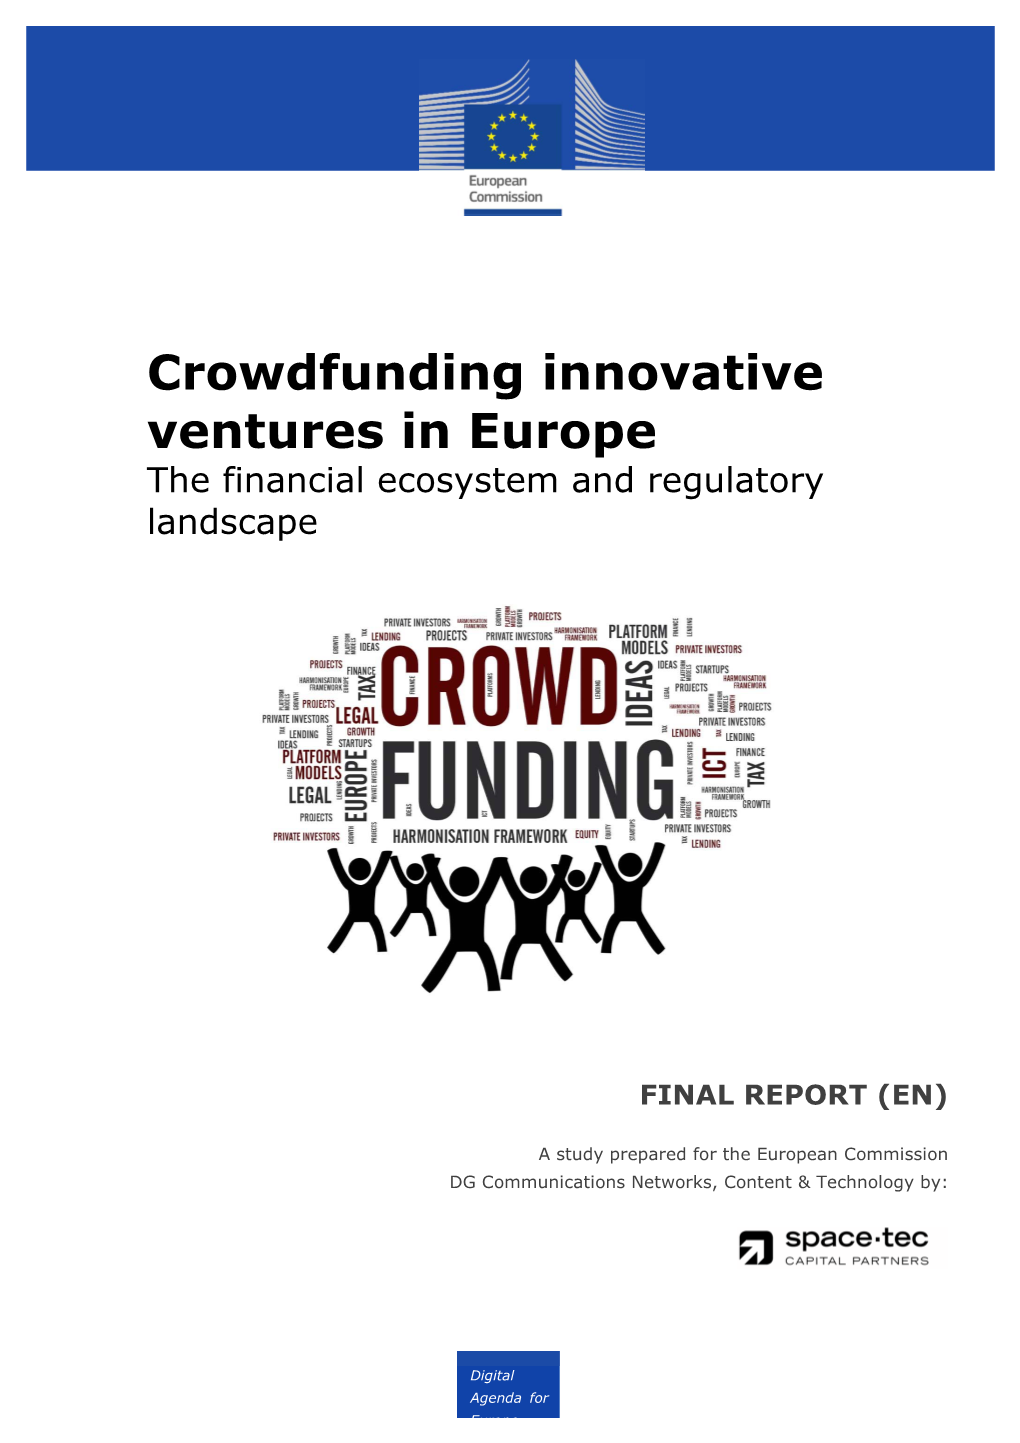 Crowdfunding Innovative Ventures in Europe the Financial Ecosystem and Regulatory Landscape